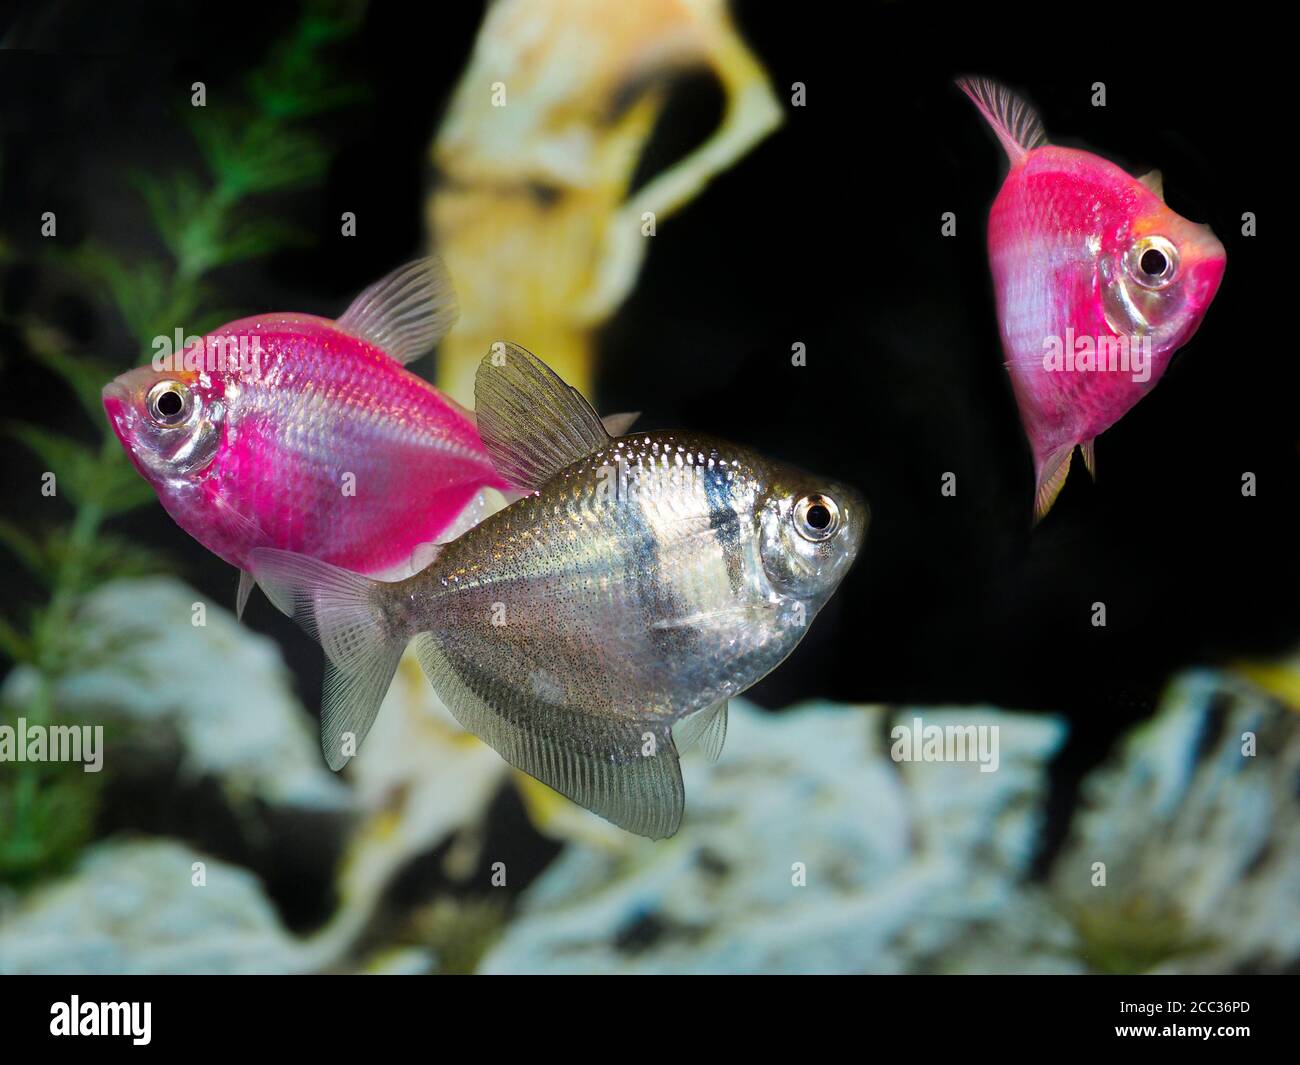 Overtuiging pack Joseph Banks Close-up of Two Pink Glow Fish and a Black Widow Tetra in an Aquarium Stock  Photo - Alamy